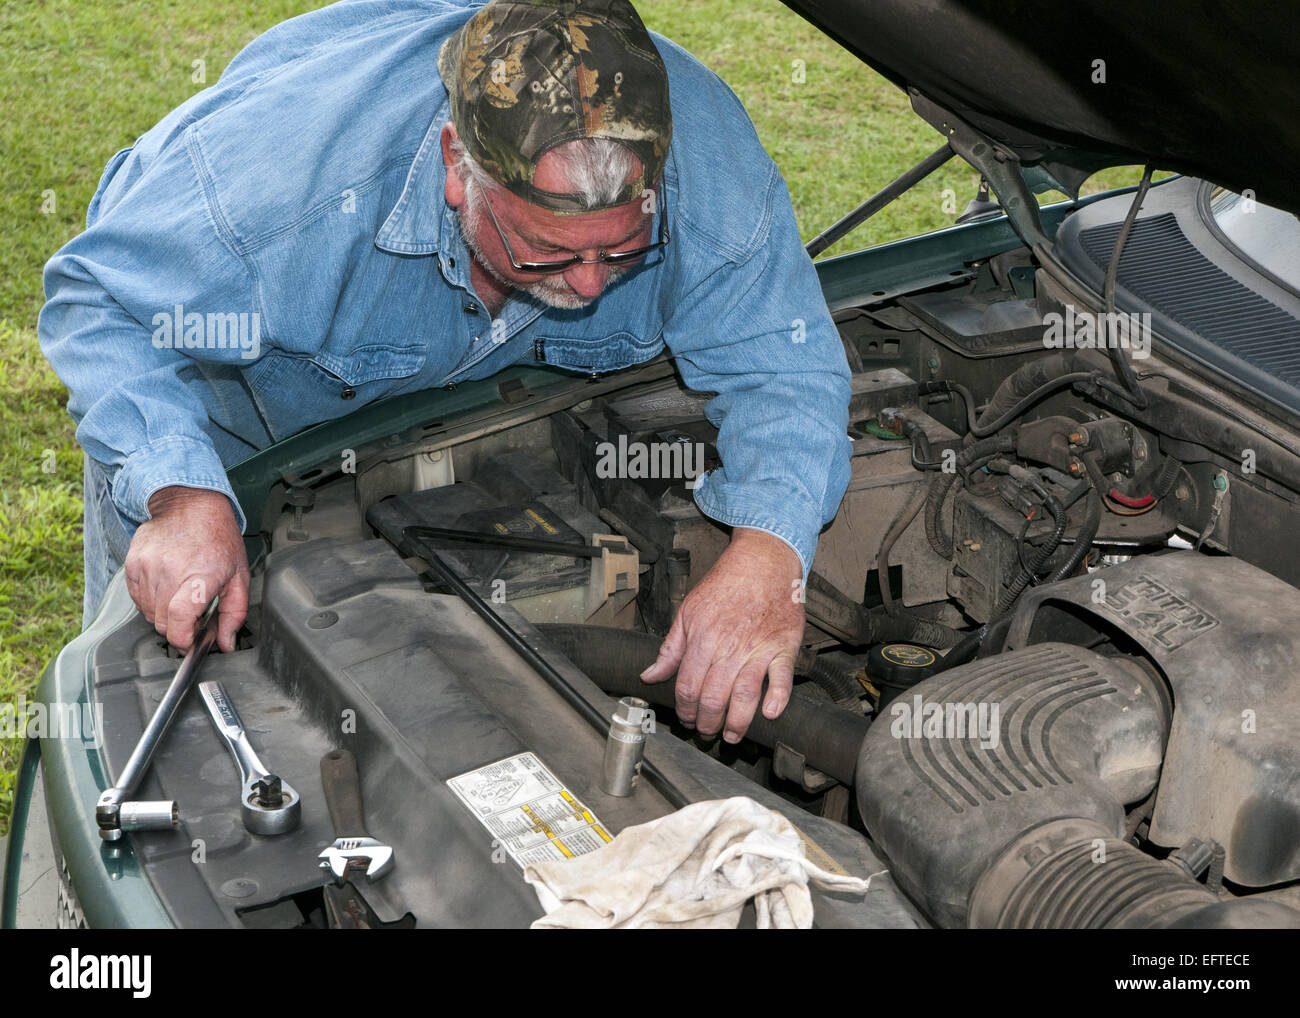 Man working on repairing his vehicle at home. Stock Photo